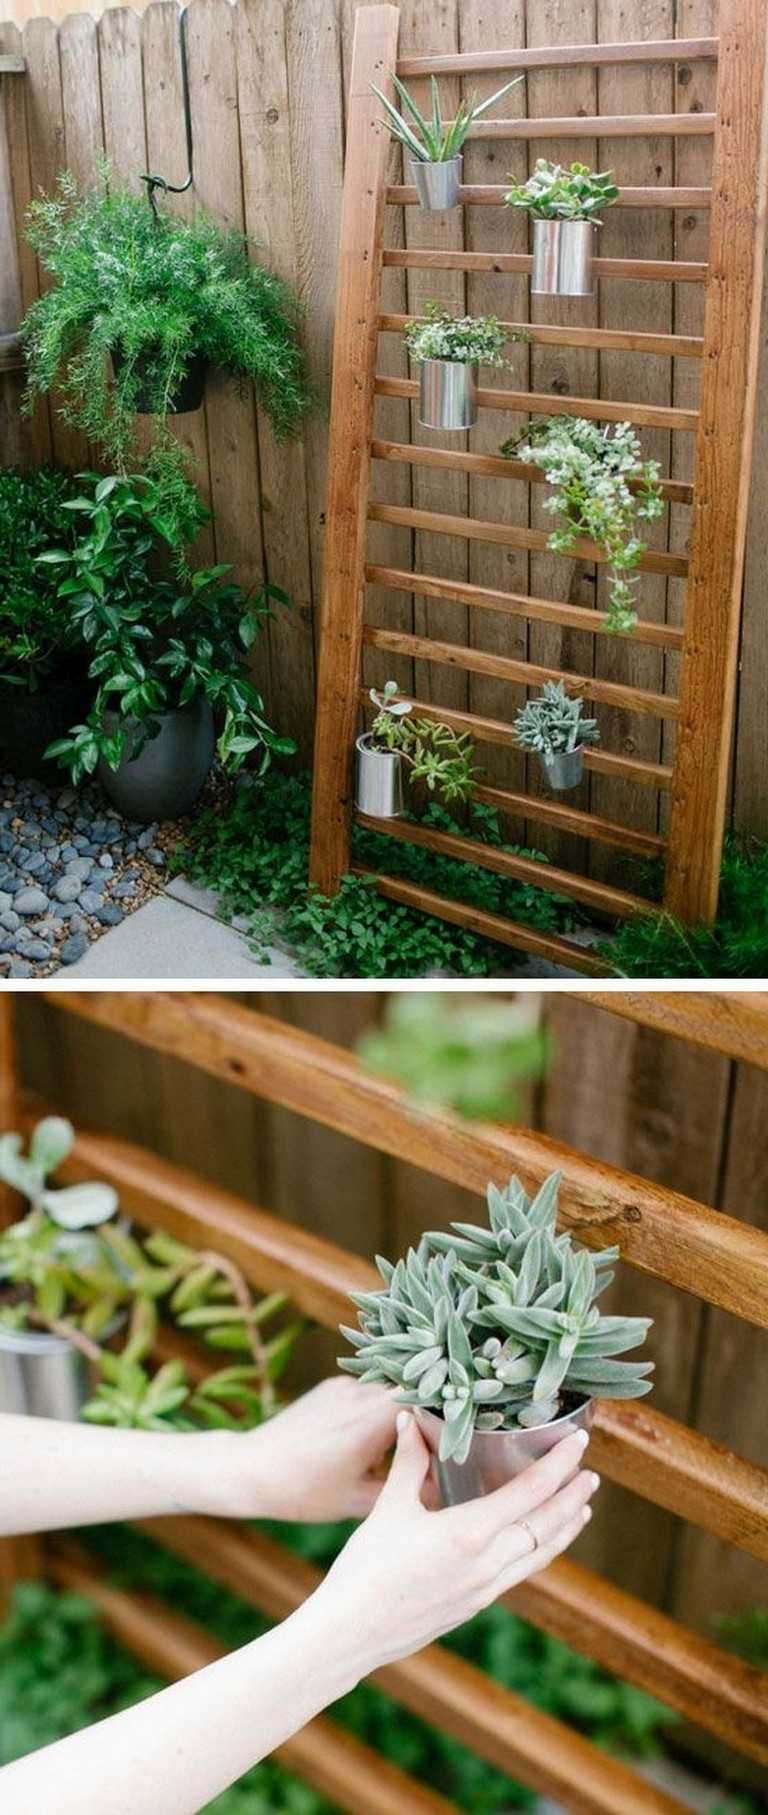 40 Fantastic Backyard Ideas On A Budget - Page 5 of 40 ...